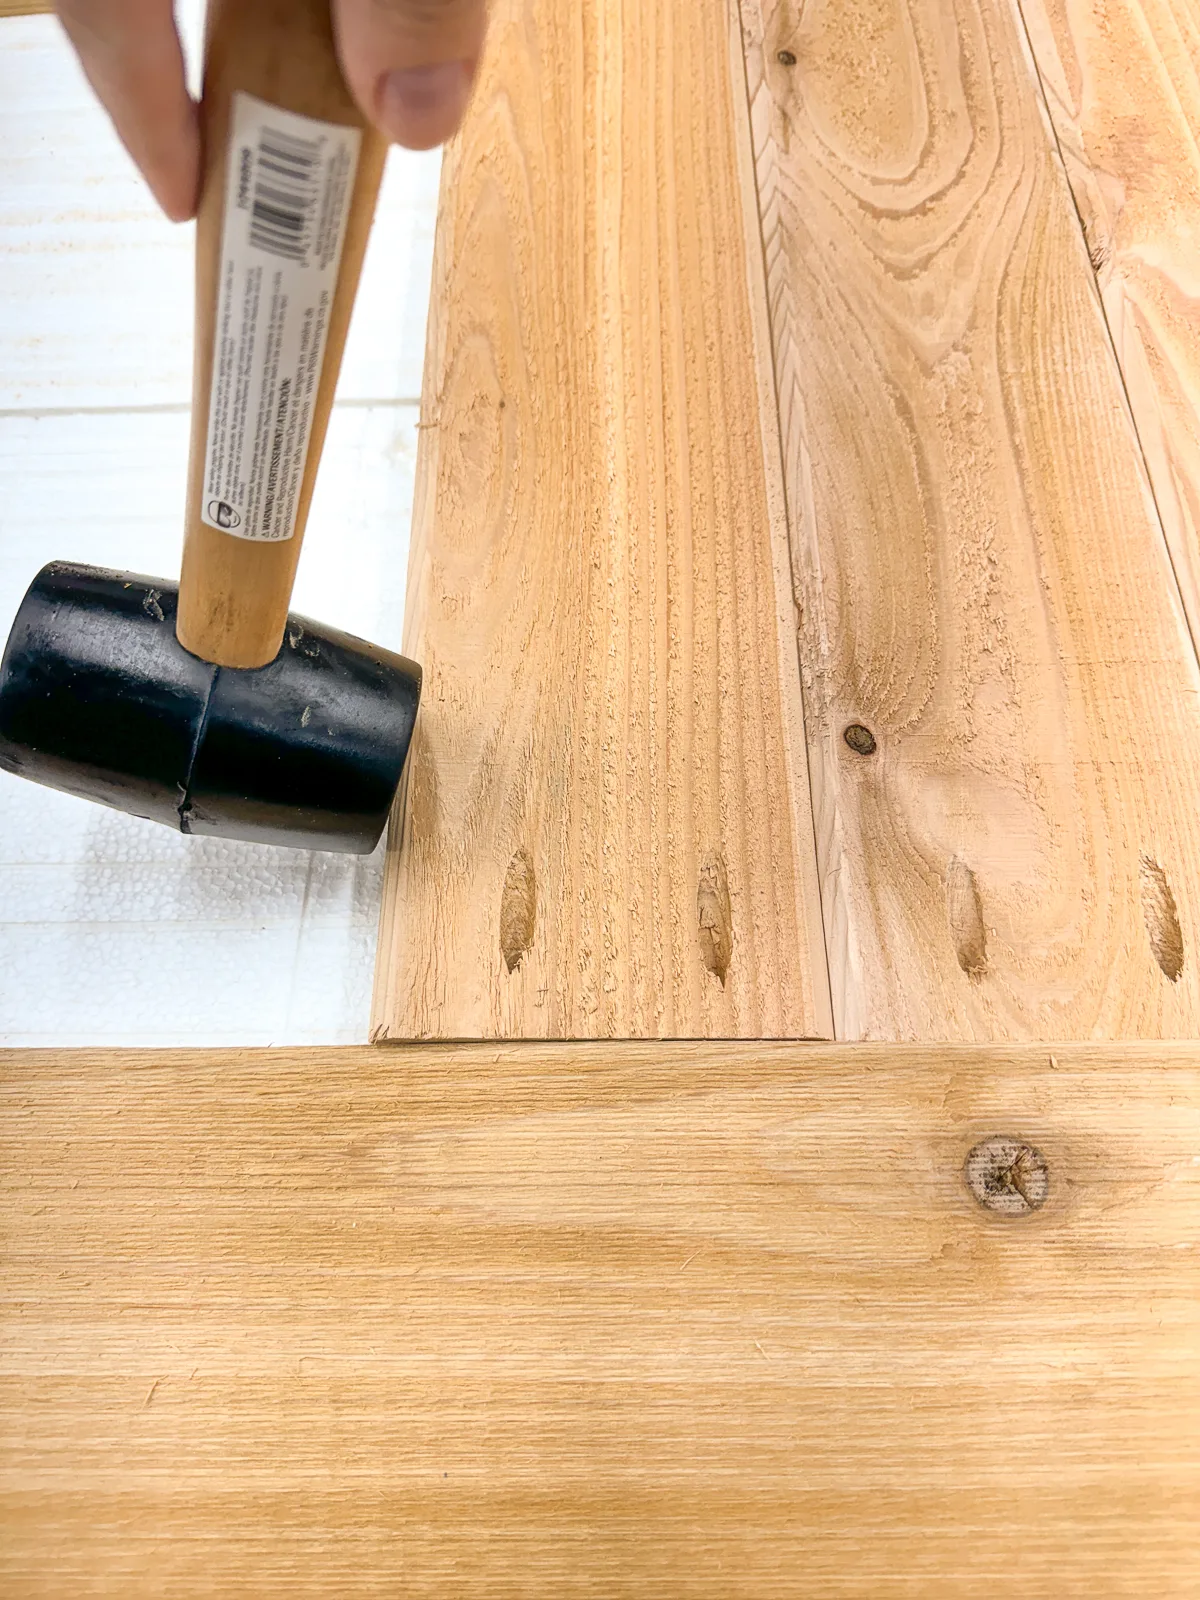 tapping tongue and groove boards together with a rubber mallet